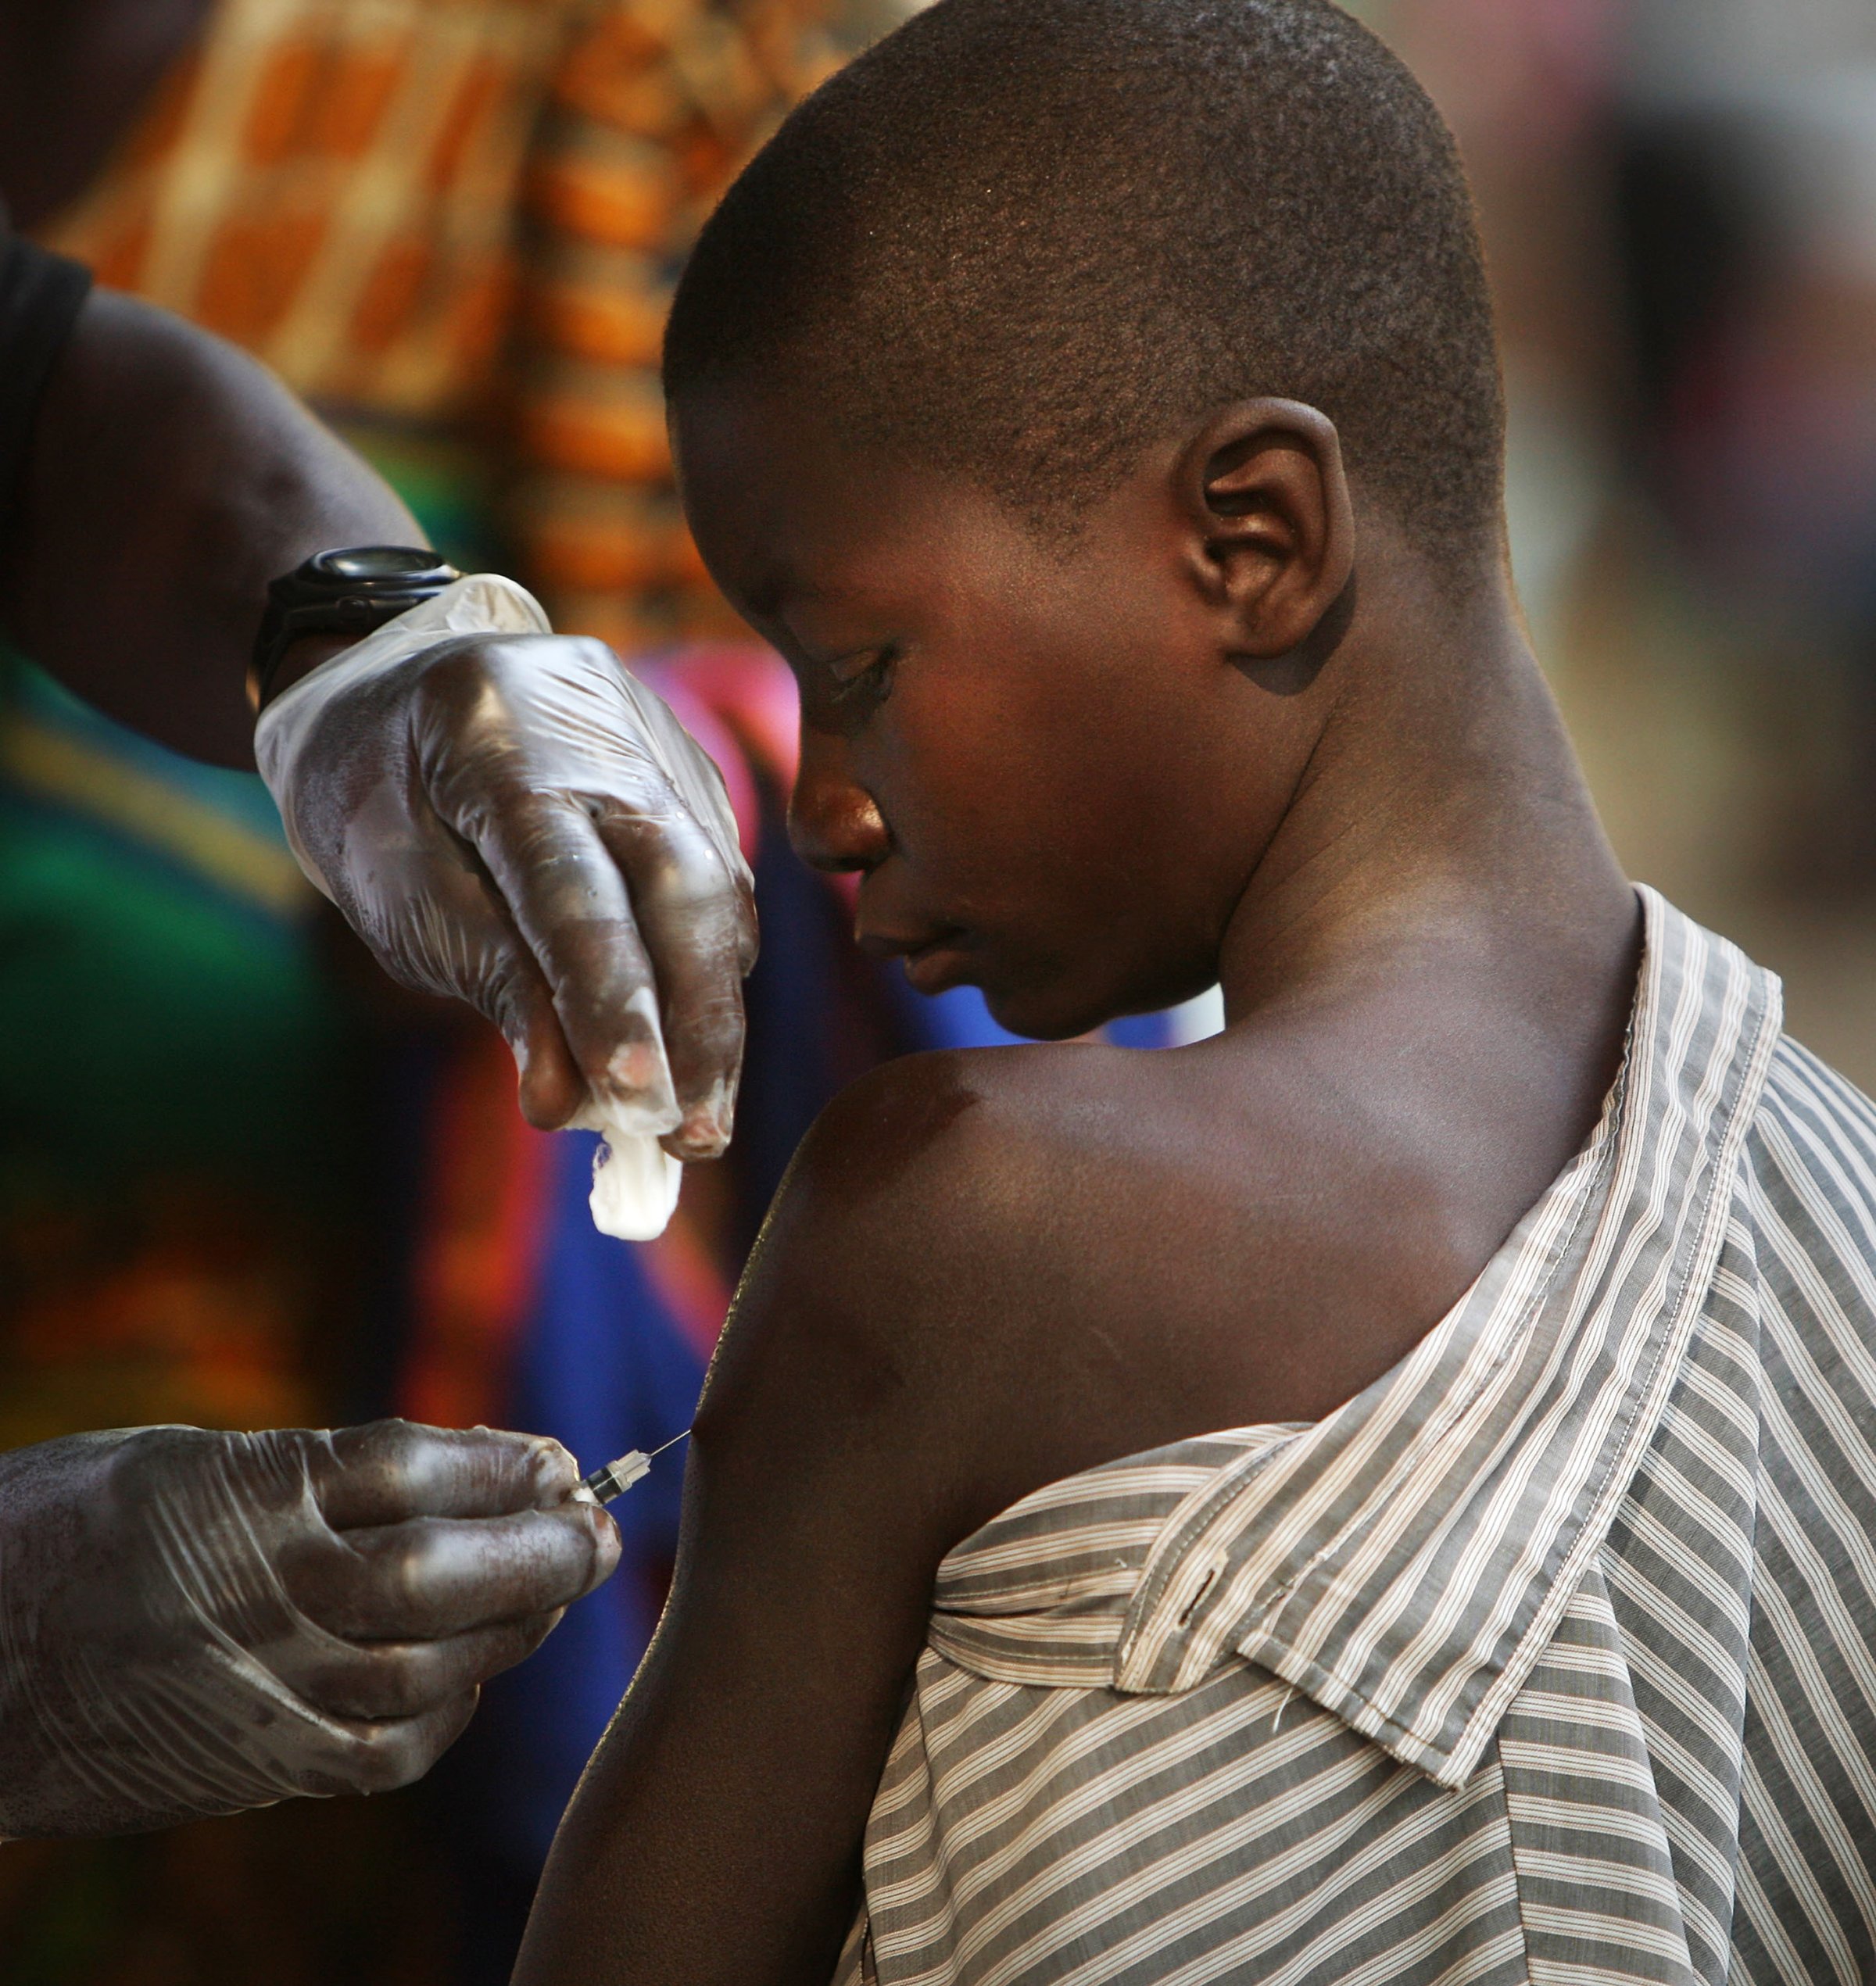 Now more than ever: Measles vaccinations have dramatically cut disease rates in Africa